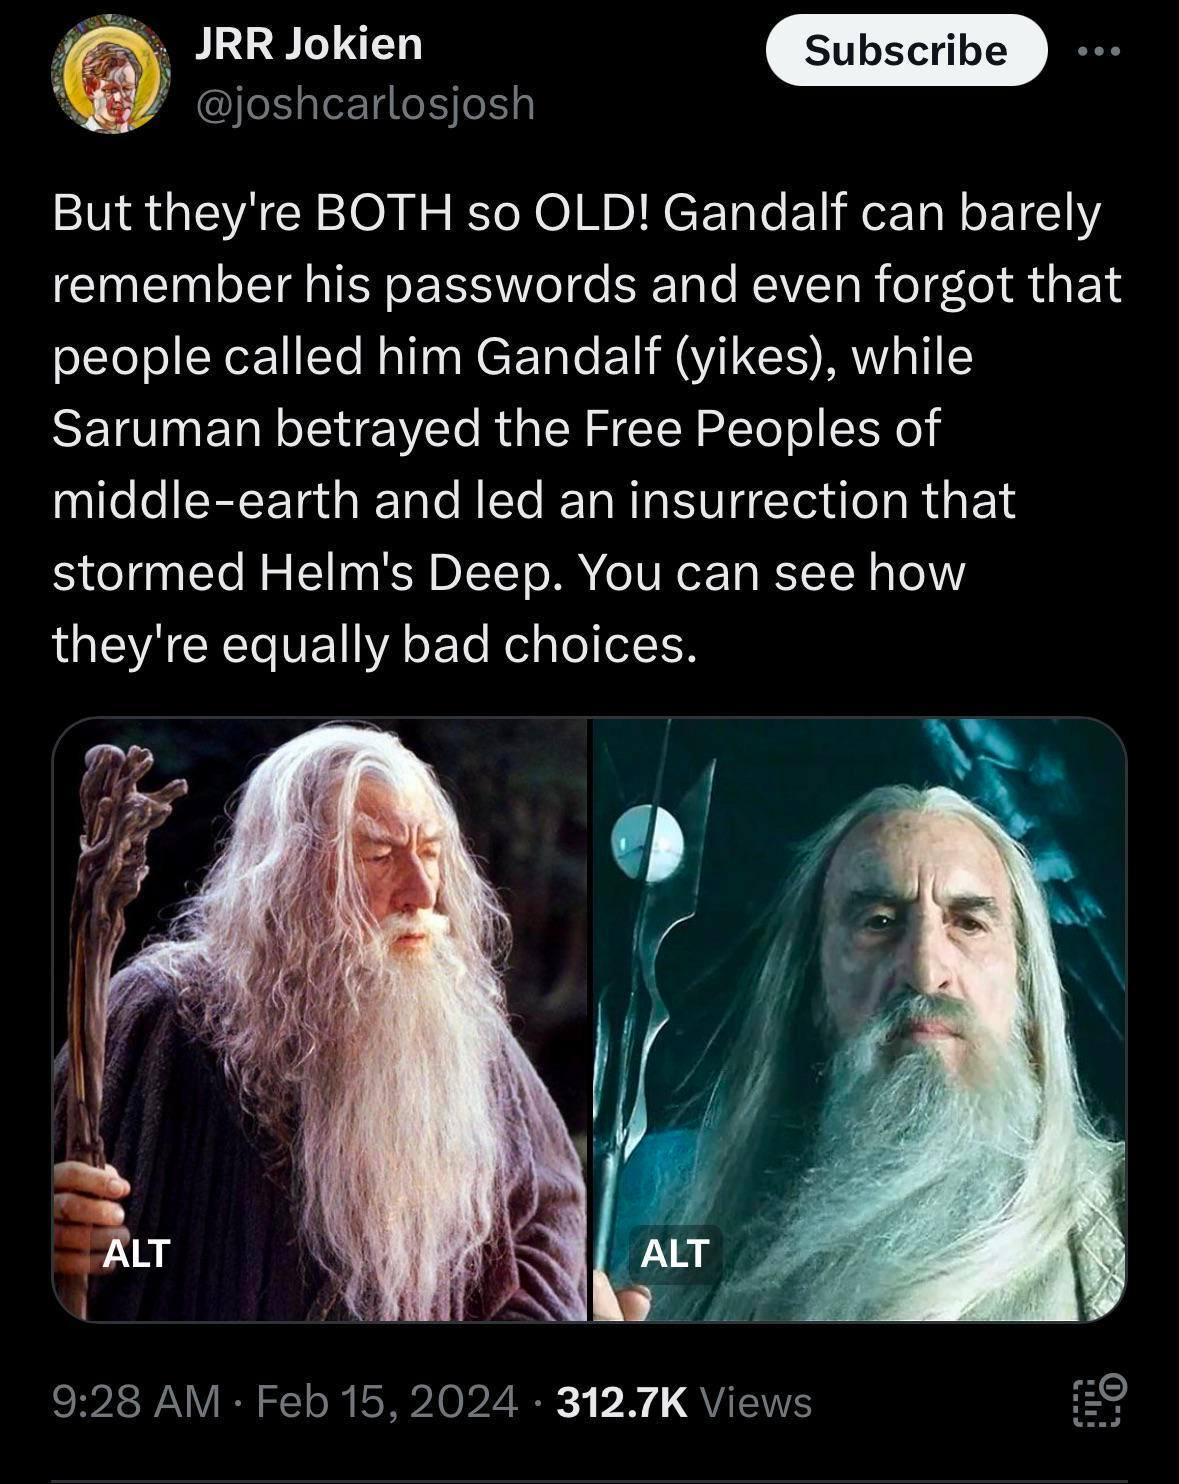 May be an image of 2 people and text that says 'JRR Jokien @joshcarlosjosh Subscribe But they' BOTH so OLD! Ganda Gandalf can barely remember his passwords and even forgot that people called him Gandalf (yikes), while Saruman betrayed the Free Peoples of middle-earth and led an insurrection that stormee Helm's Deep. You can see how they're equally bad choices. ALT ALT 9:28AM Feb15, 2024 312.7K Views'